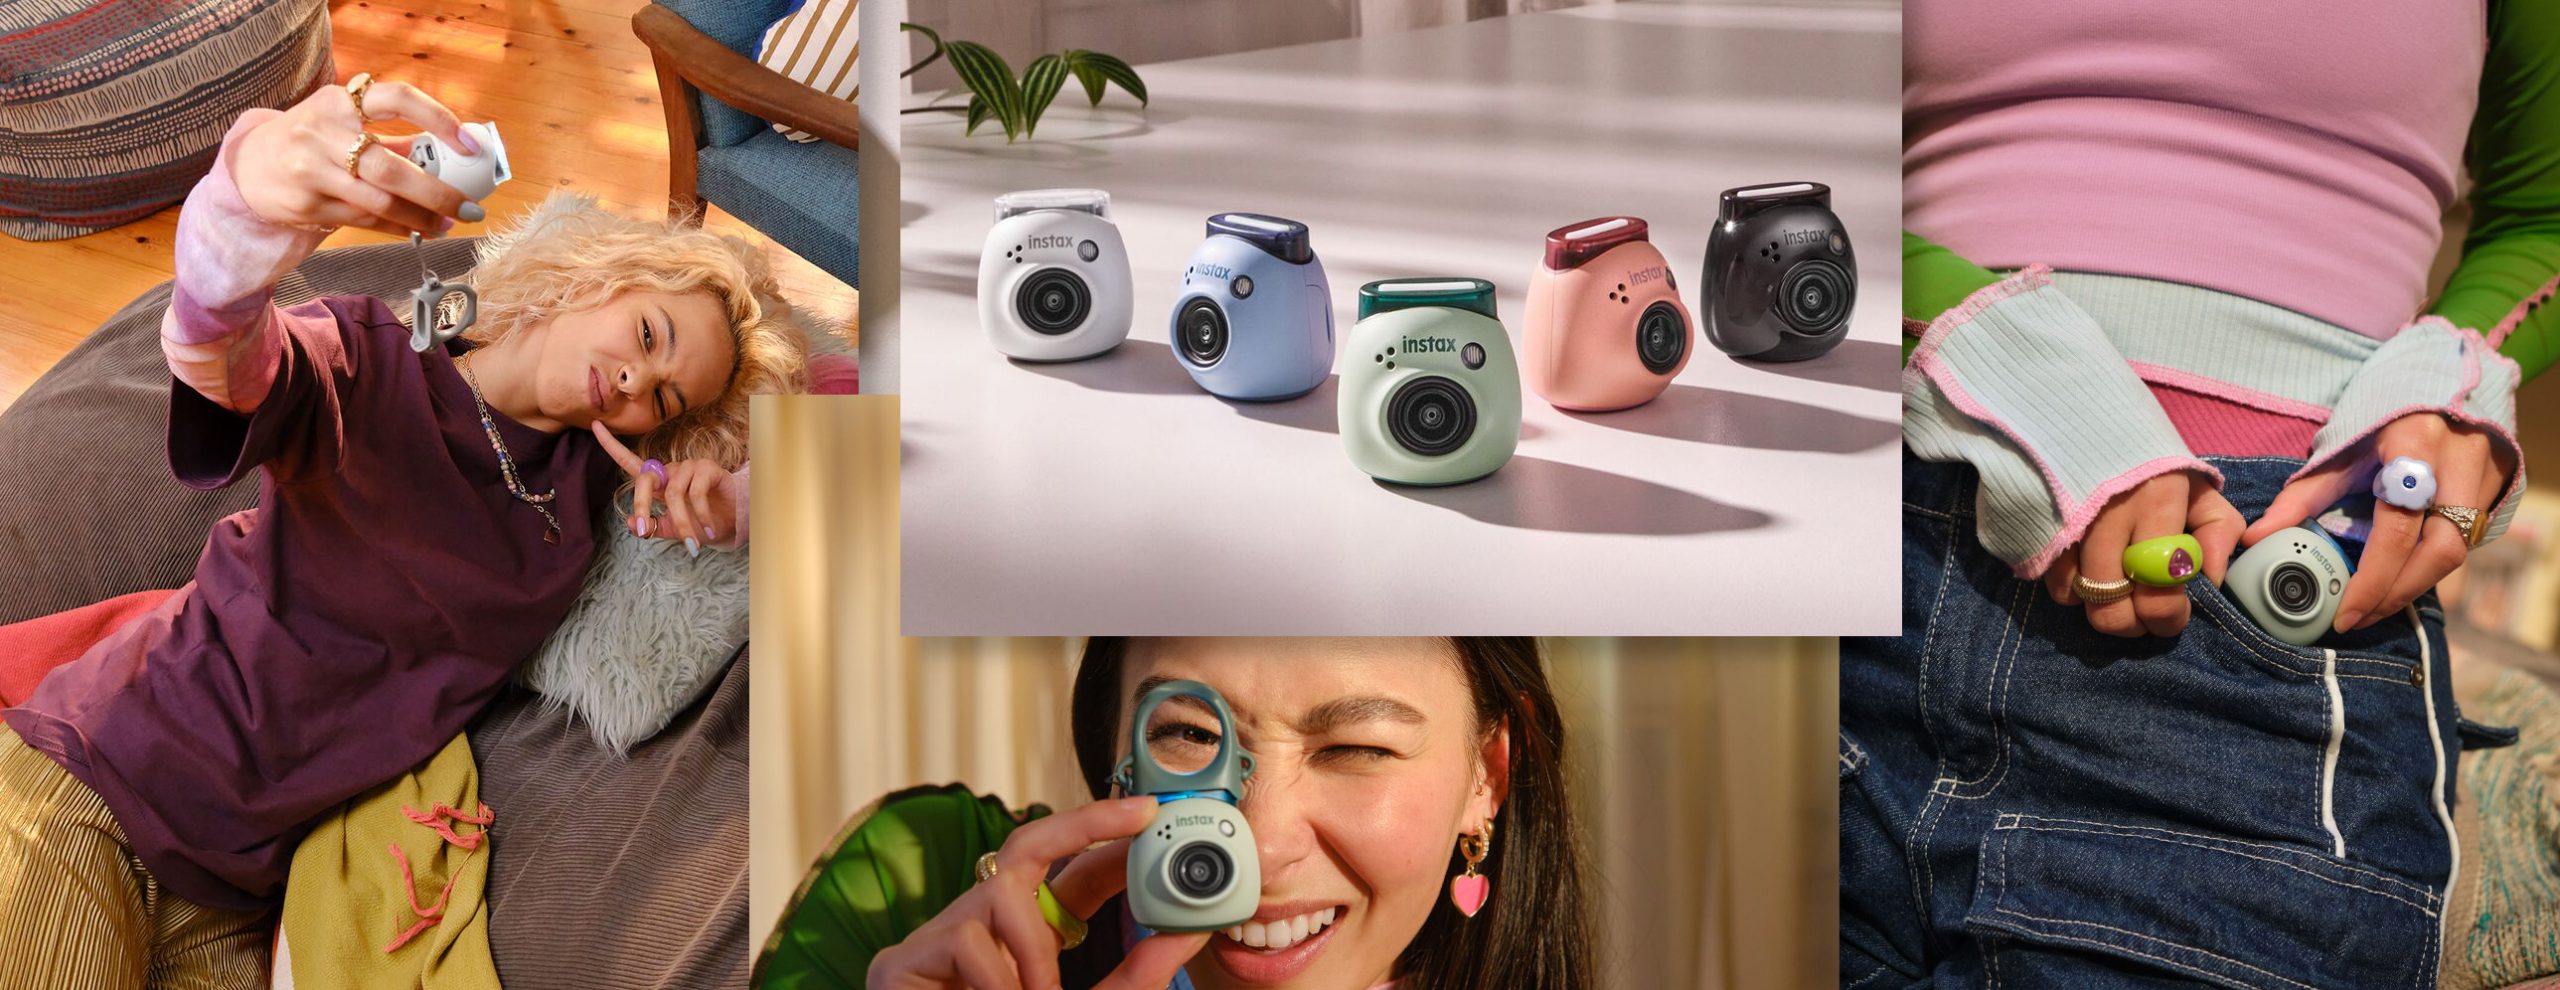 Fujifilm Instax Pal: The smallest Instax camera fits in your palm